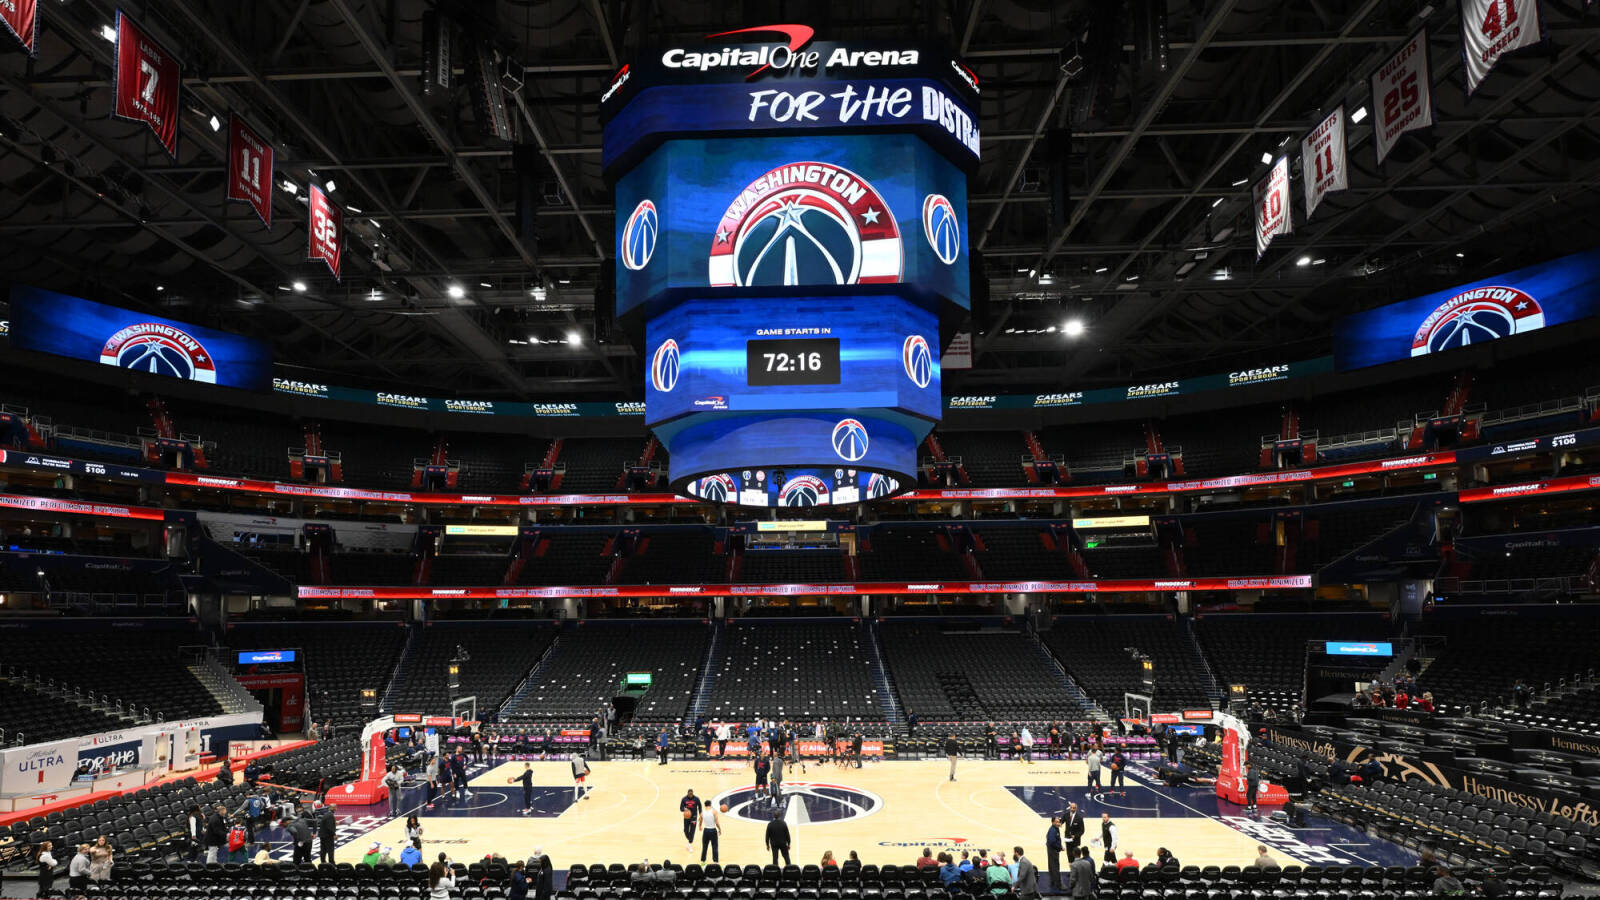 Report: Wizards will try to acquire another first-round draft pick